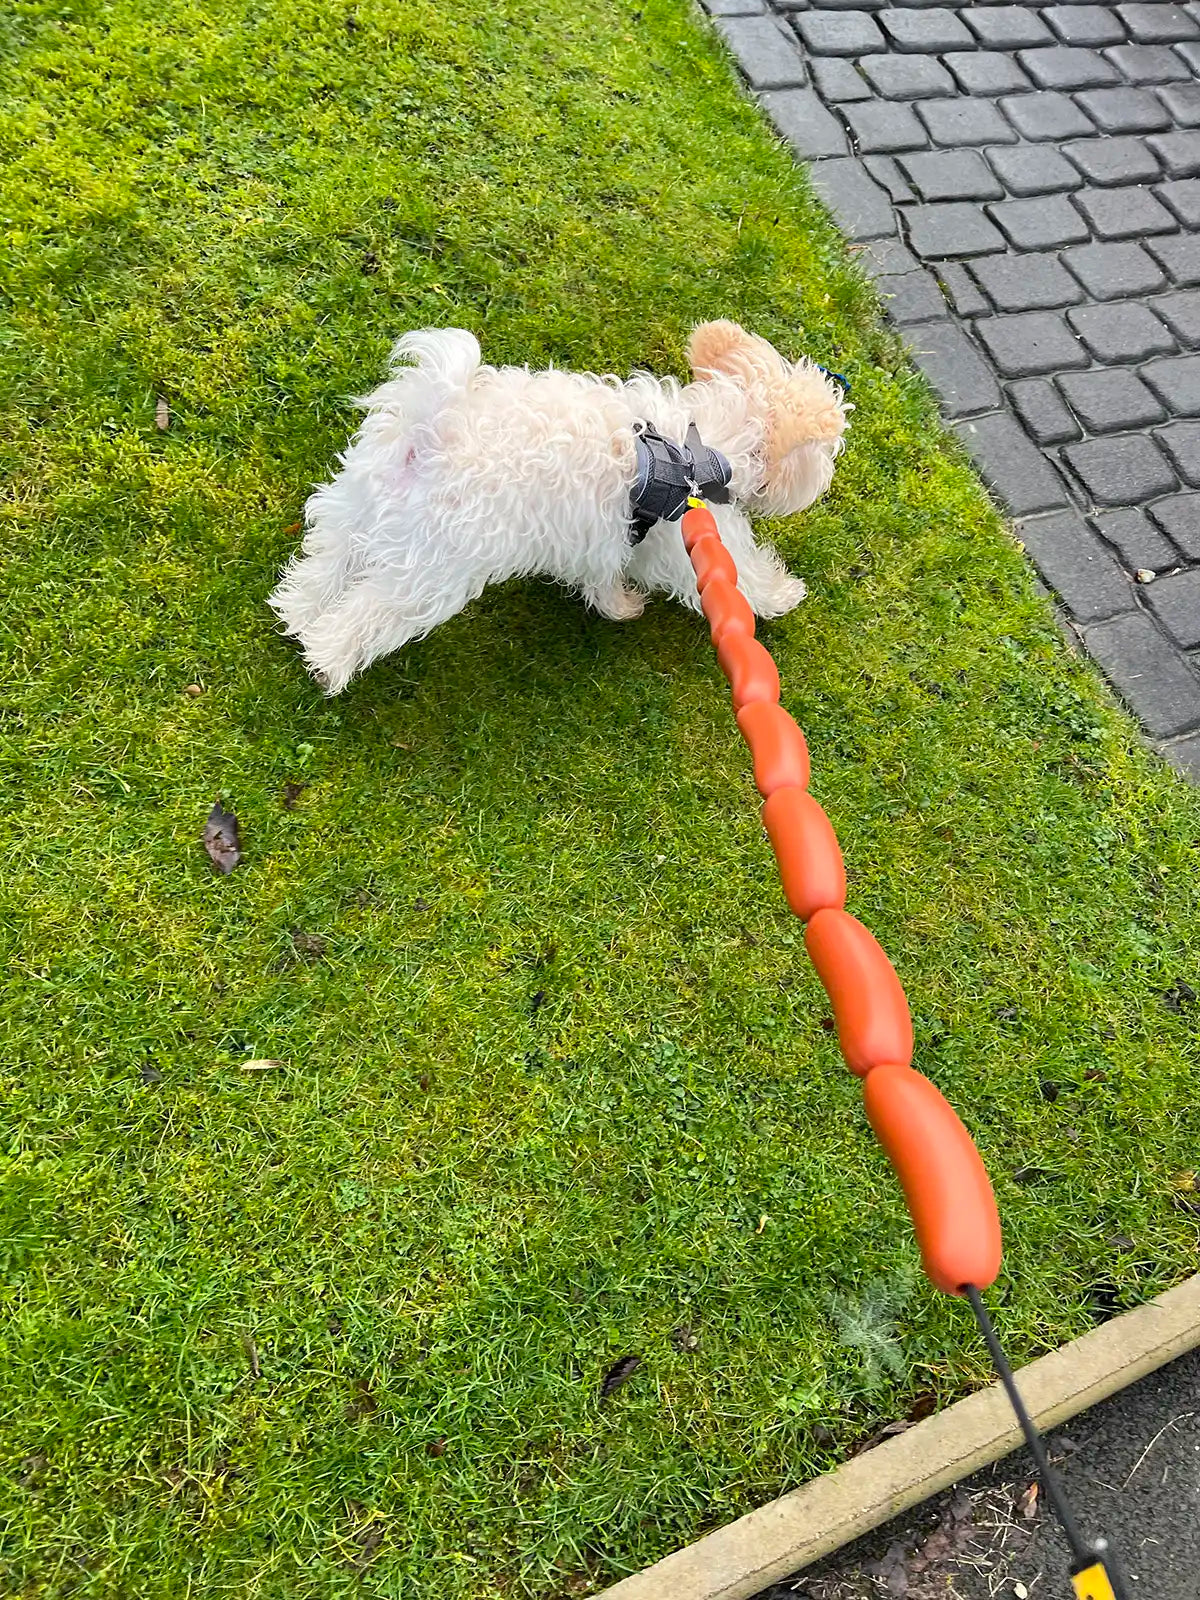 Dogs love playing in our sausage lead!